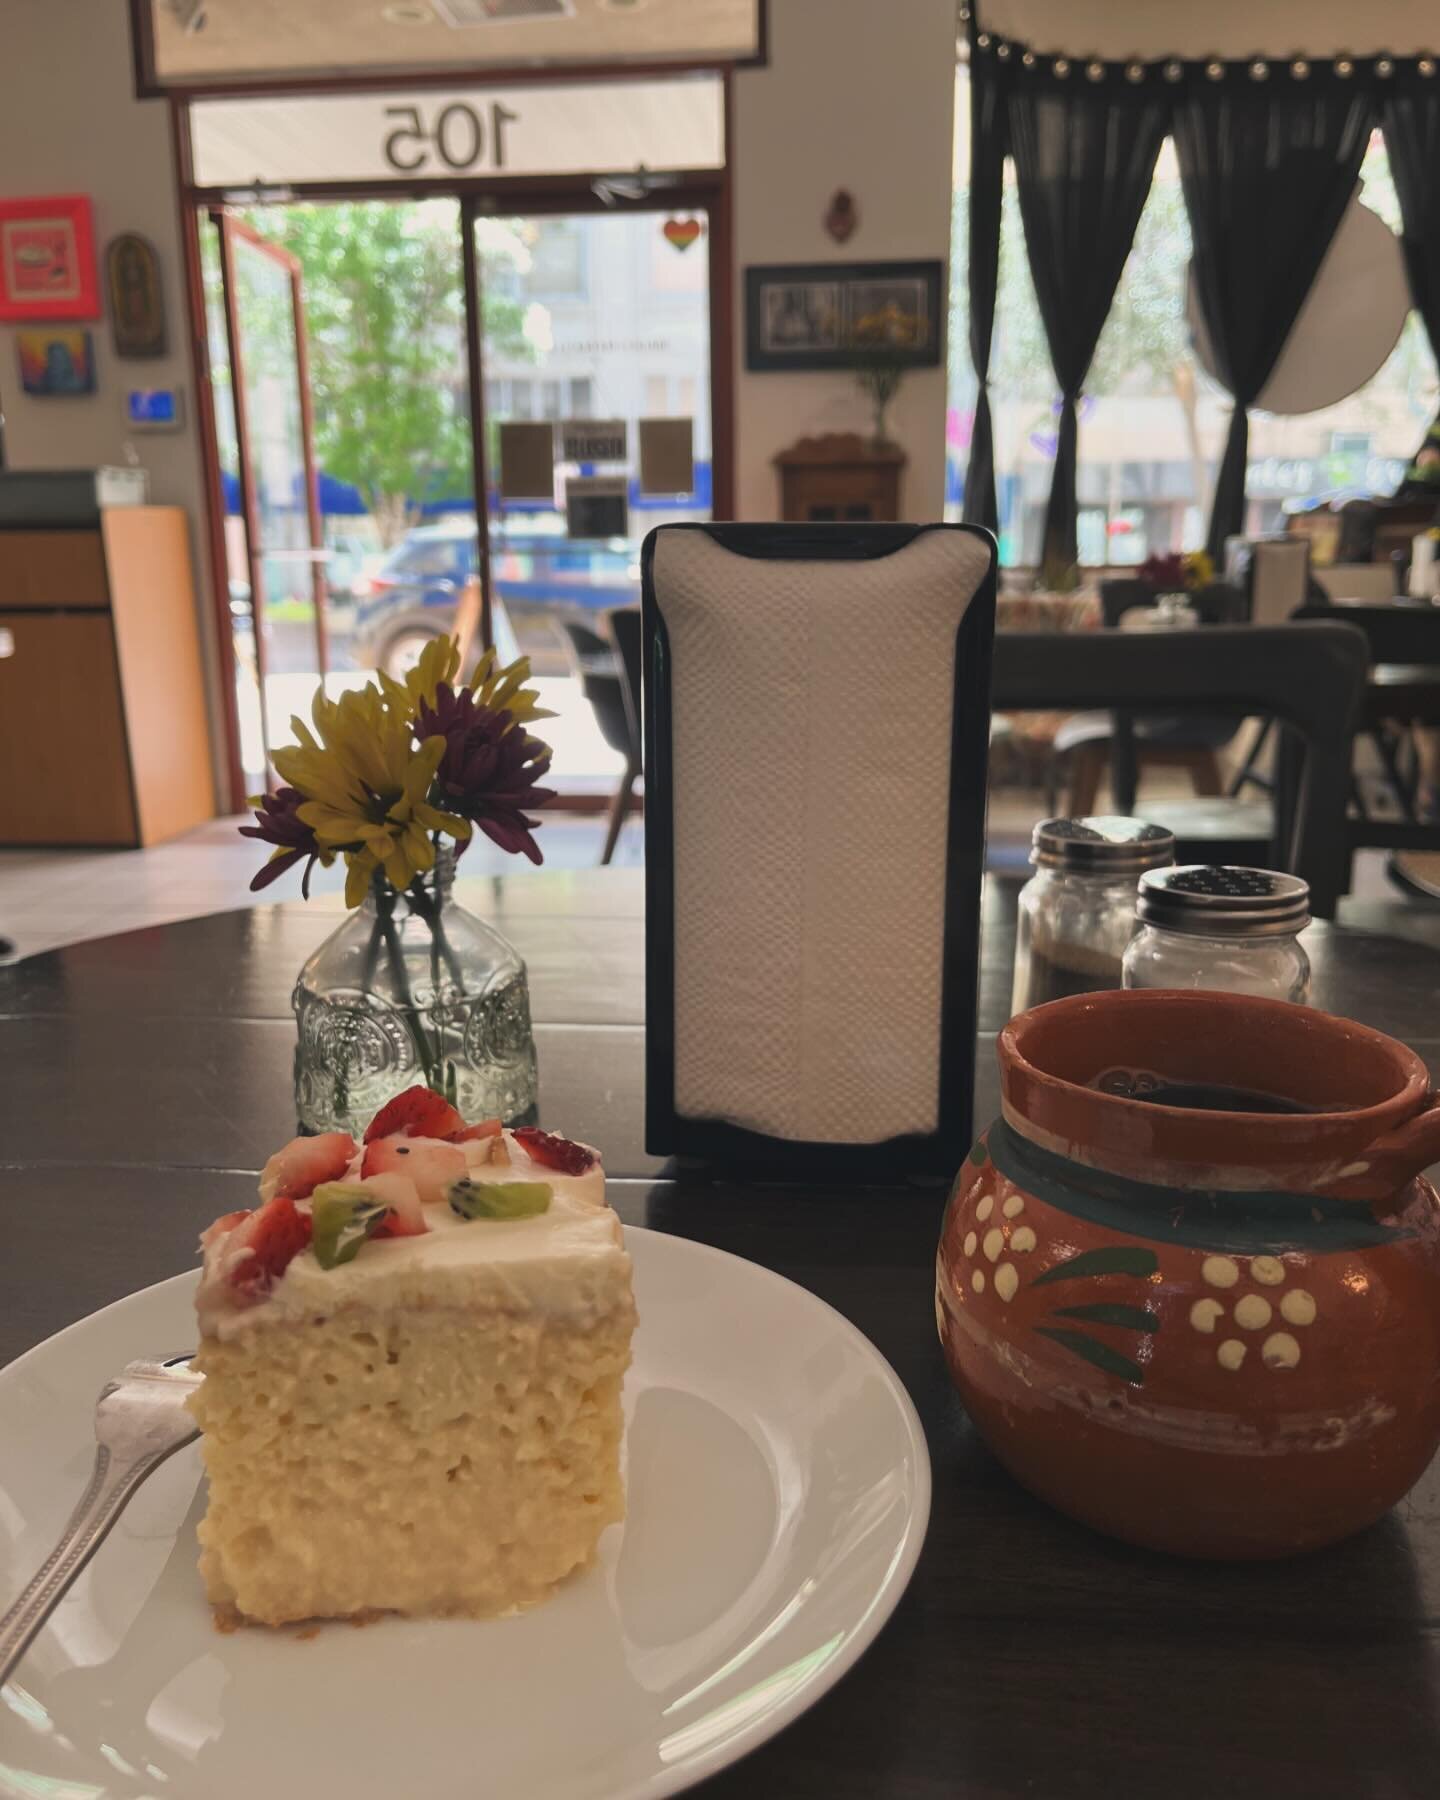 Fernanda&rsquo;s amazing Tres Leches cake. Don&rsquo;t deny yourself of this treat.